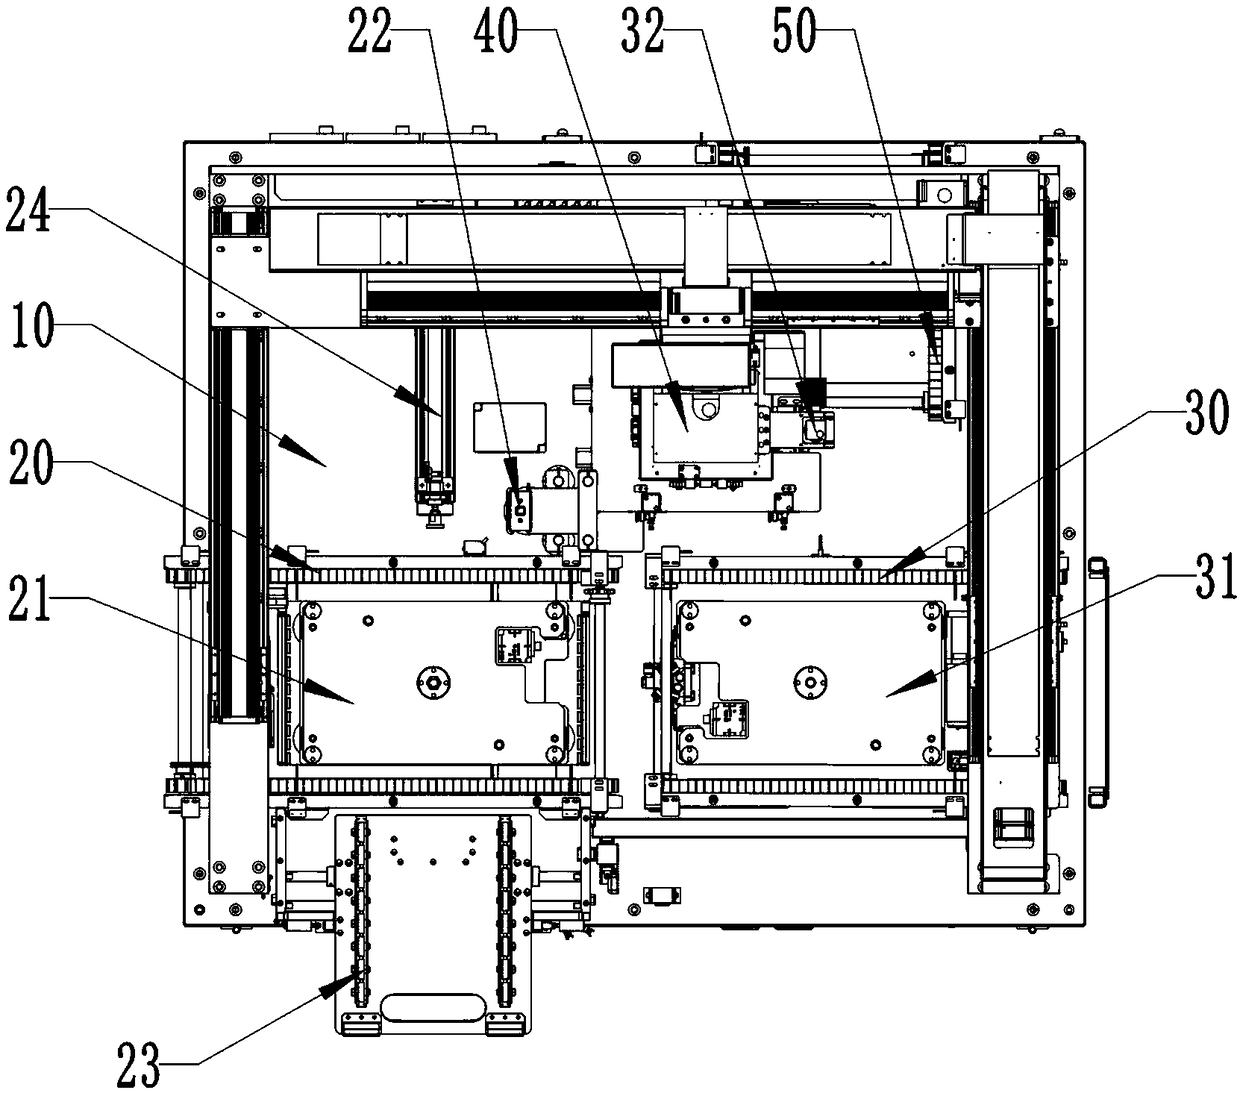 Fully-automatic assembly system